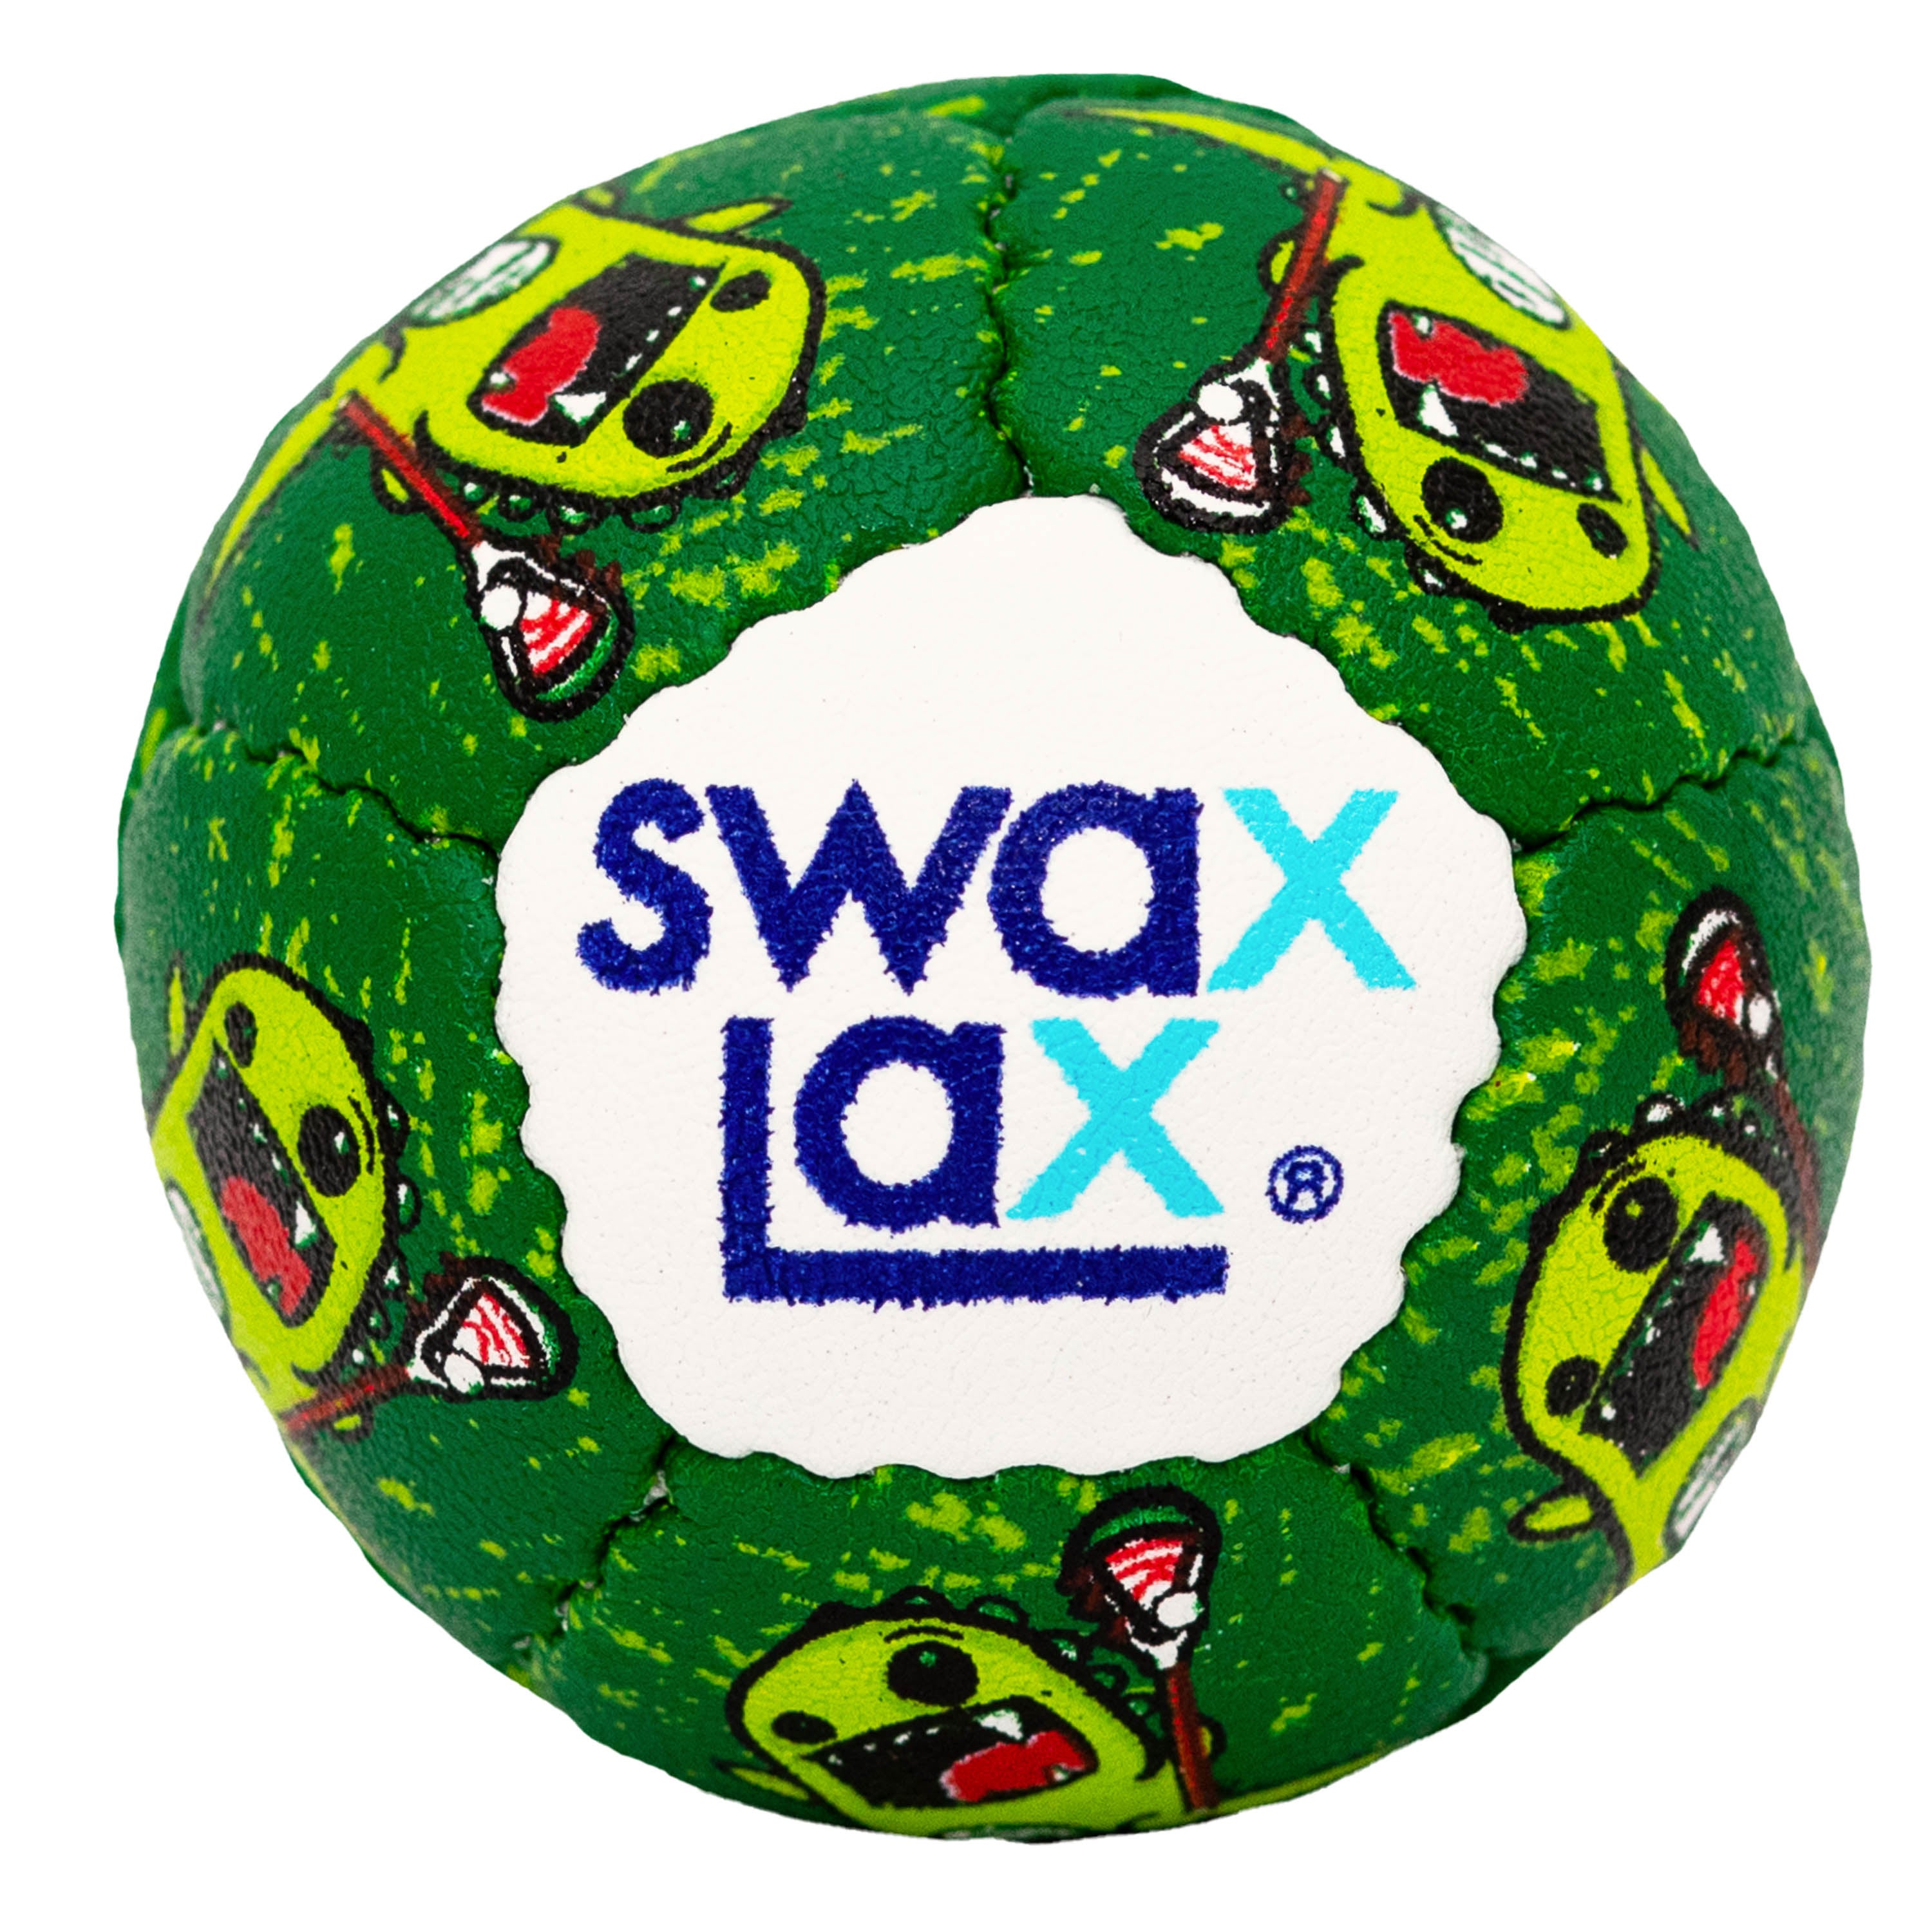 Swax Lax lacrosse training ball - Rawr front view